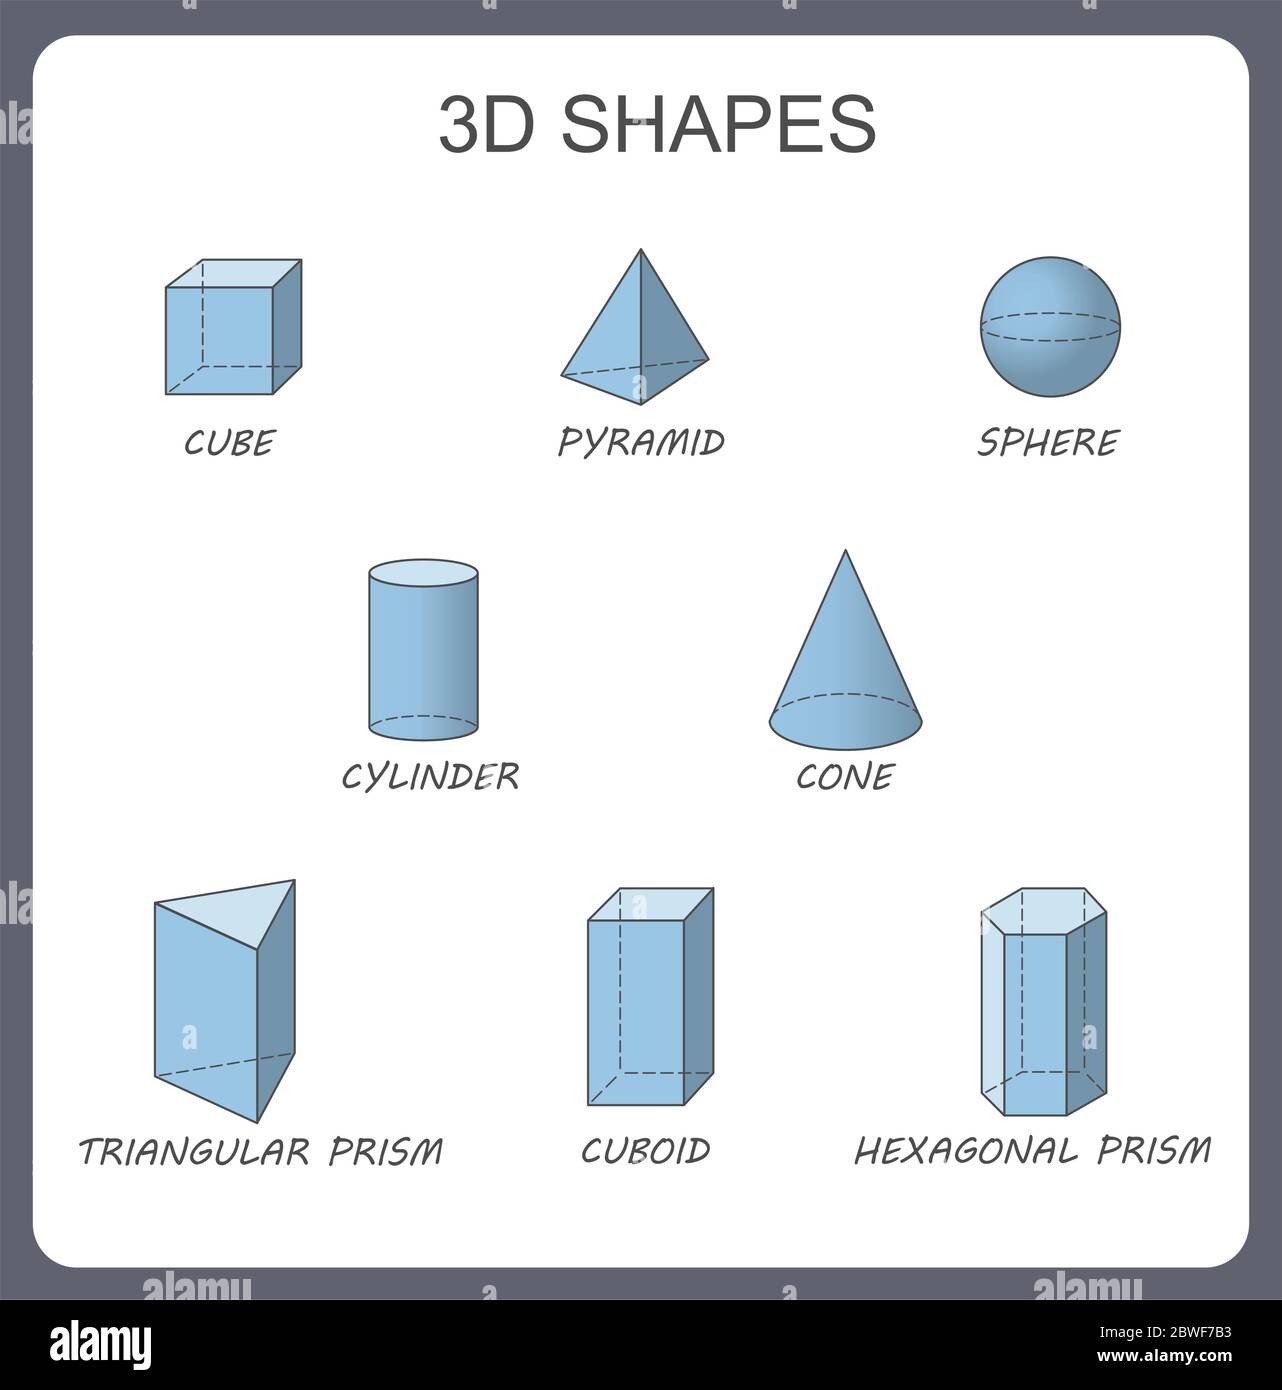 Solid 3d shapes: cylinder, cube, prism, sphere, pyramid, hexagonal ...